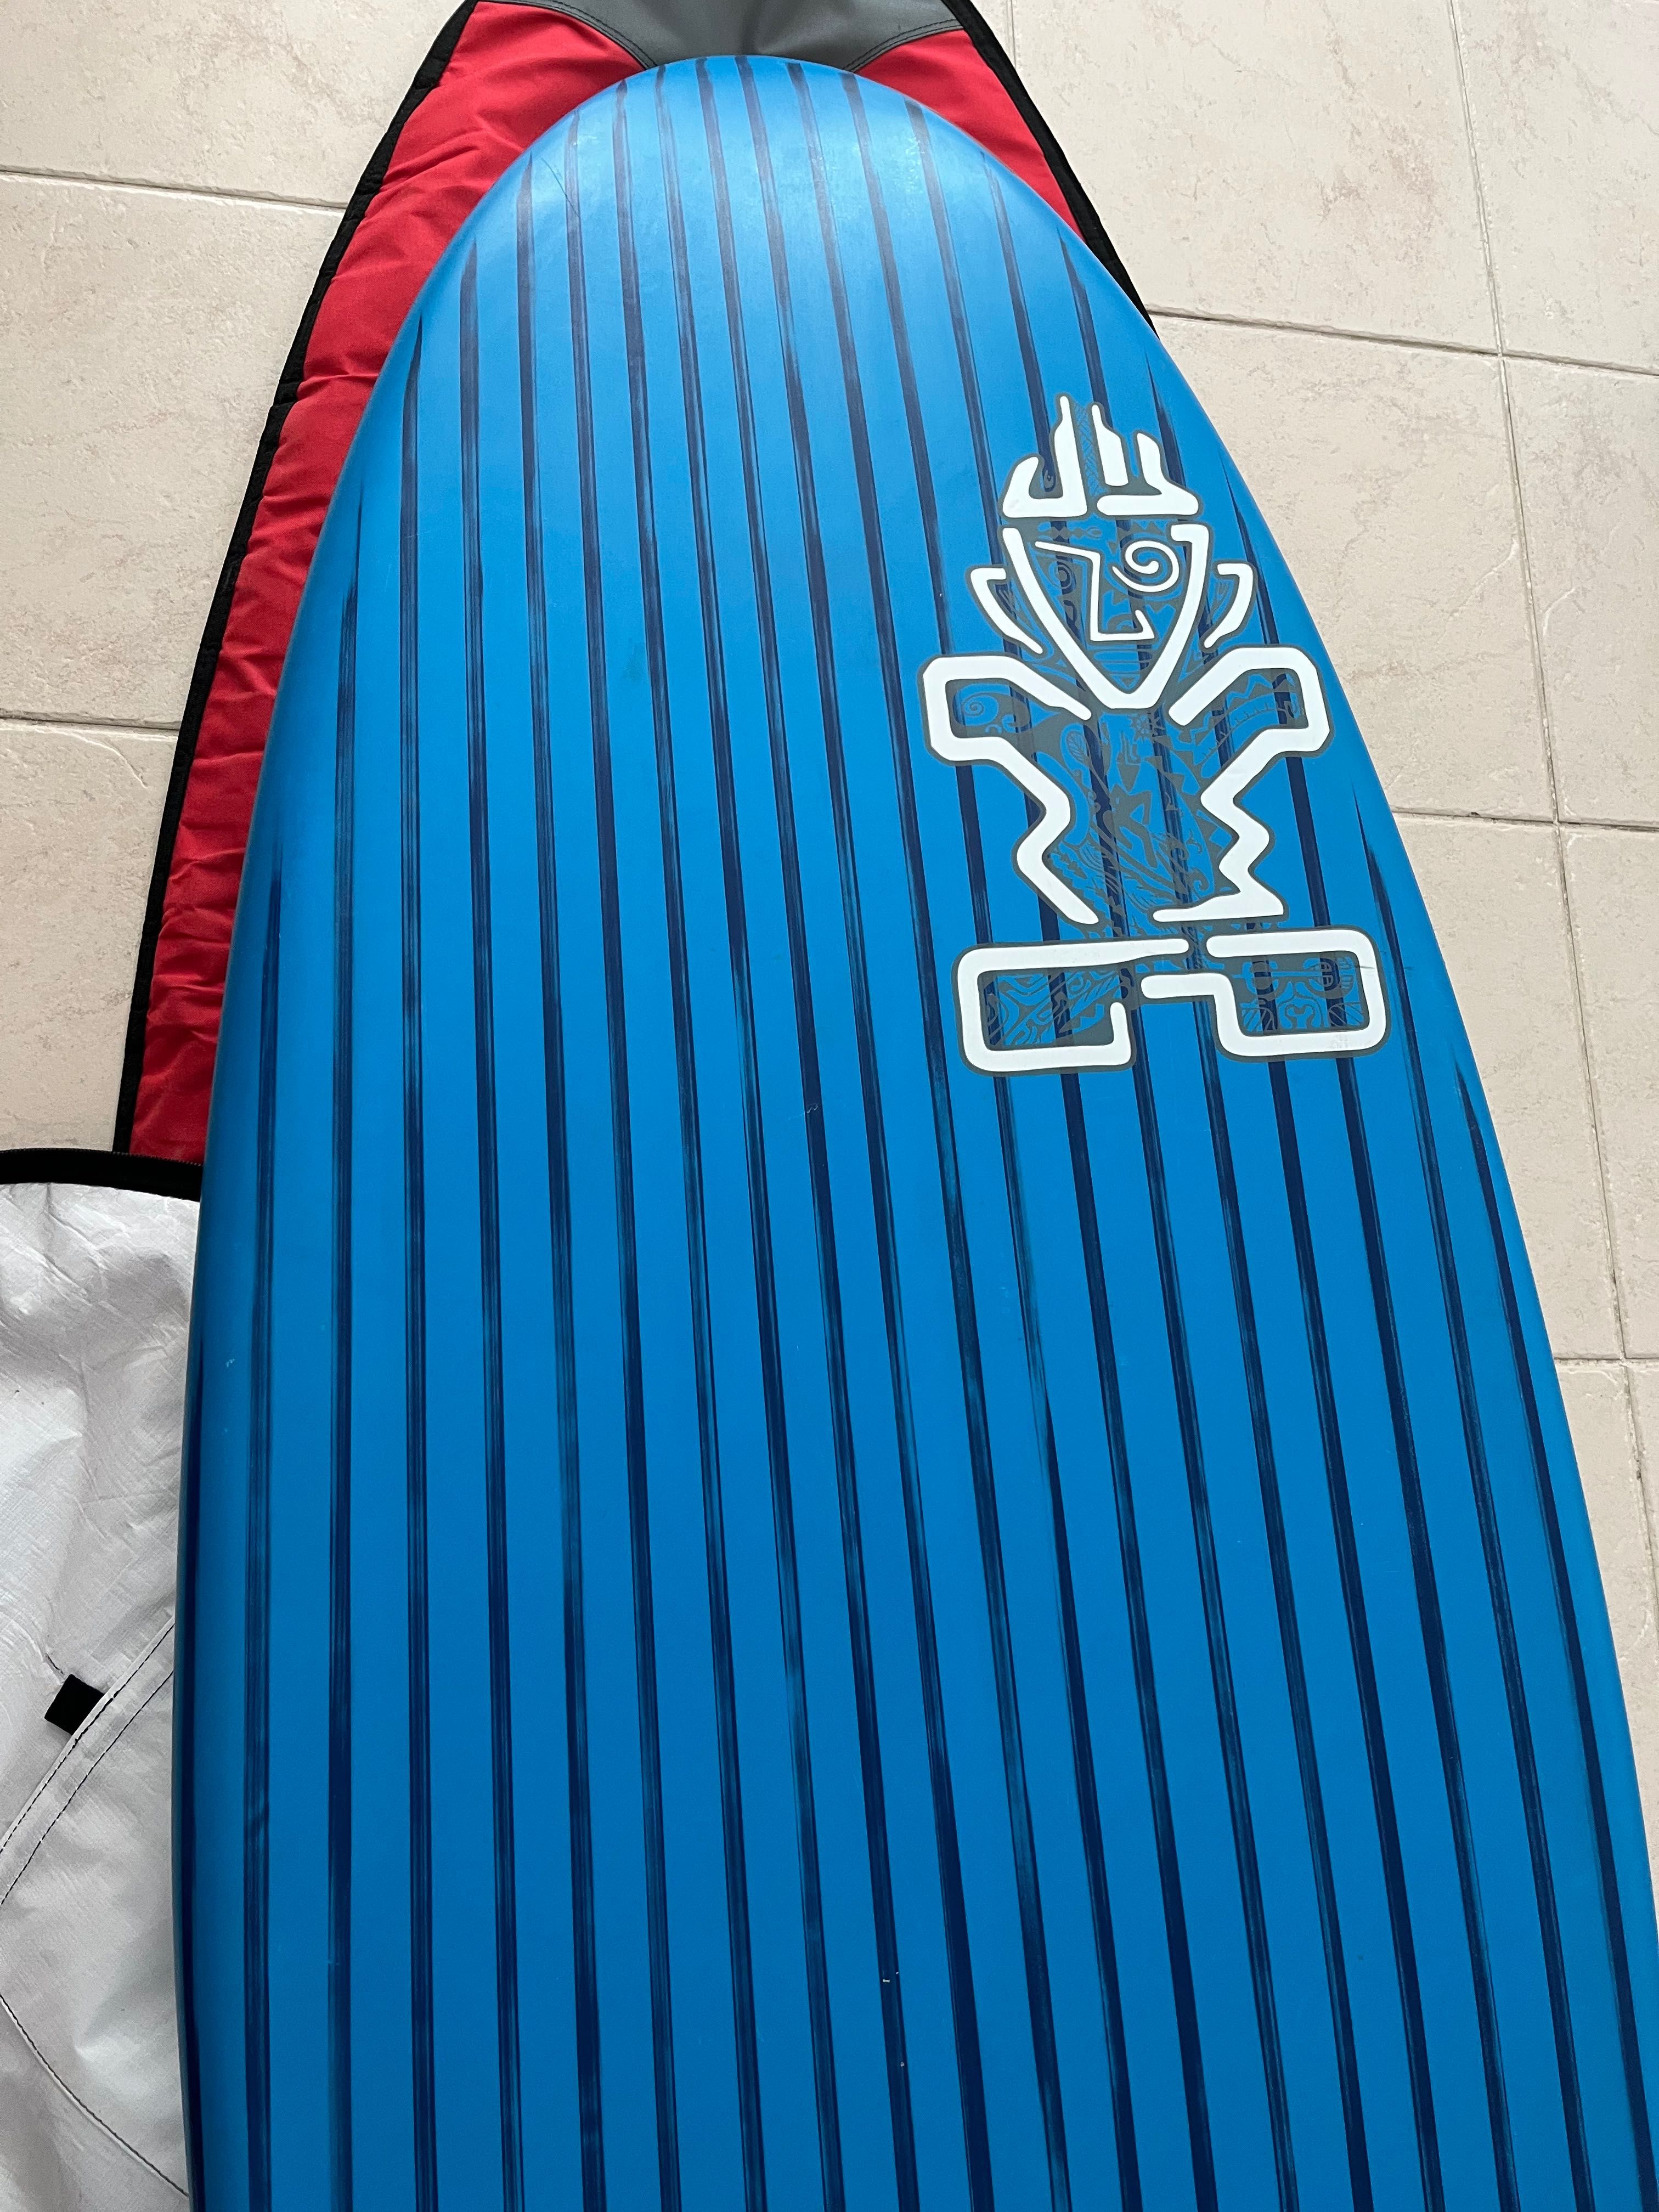 Paddle SUP Starboard PRO Blue Carbon 8’00